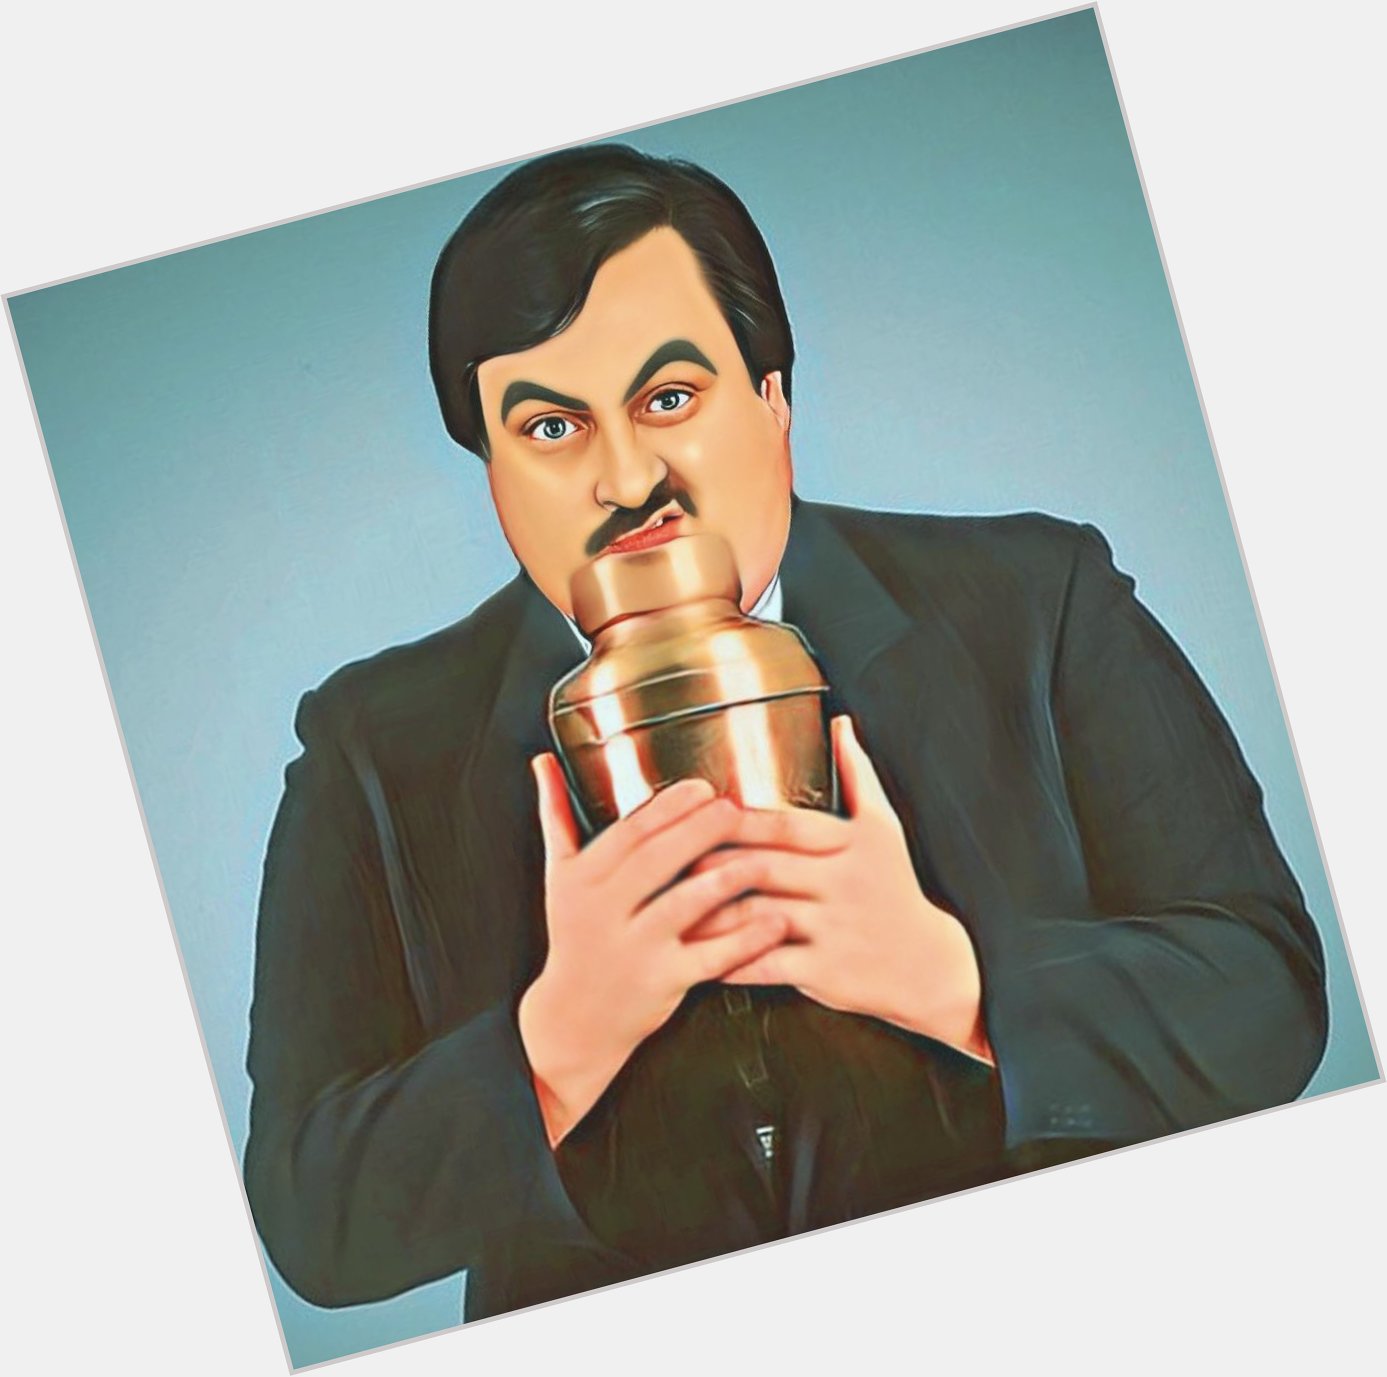 Happy Birthday One of professional wrestling\s most beloved and iconic managers, The Man known as Paul Bearer 